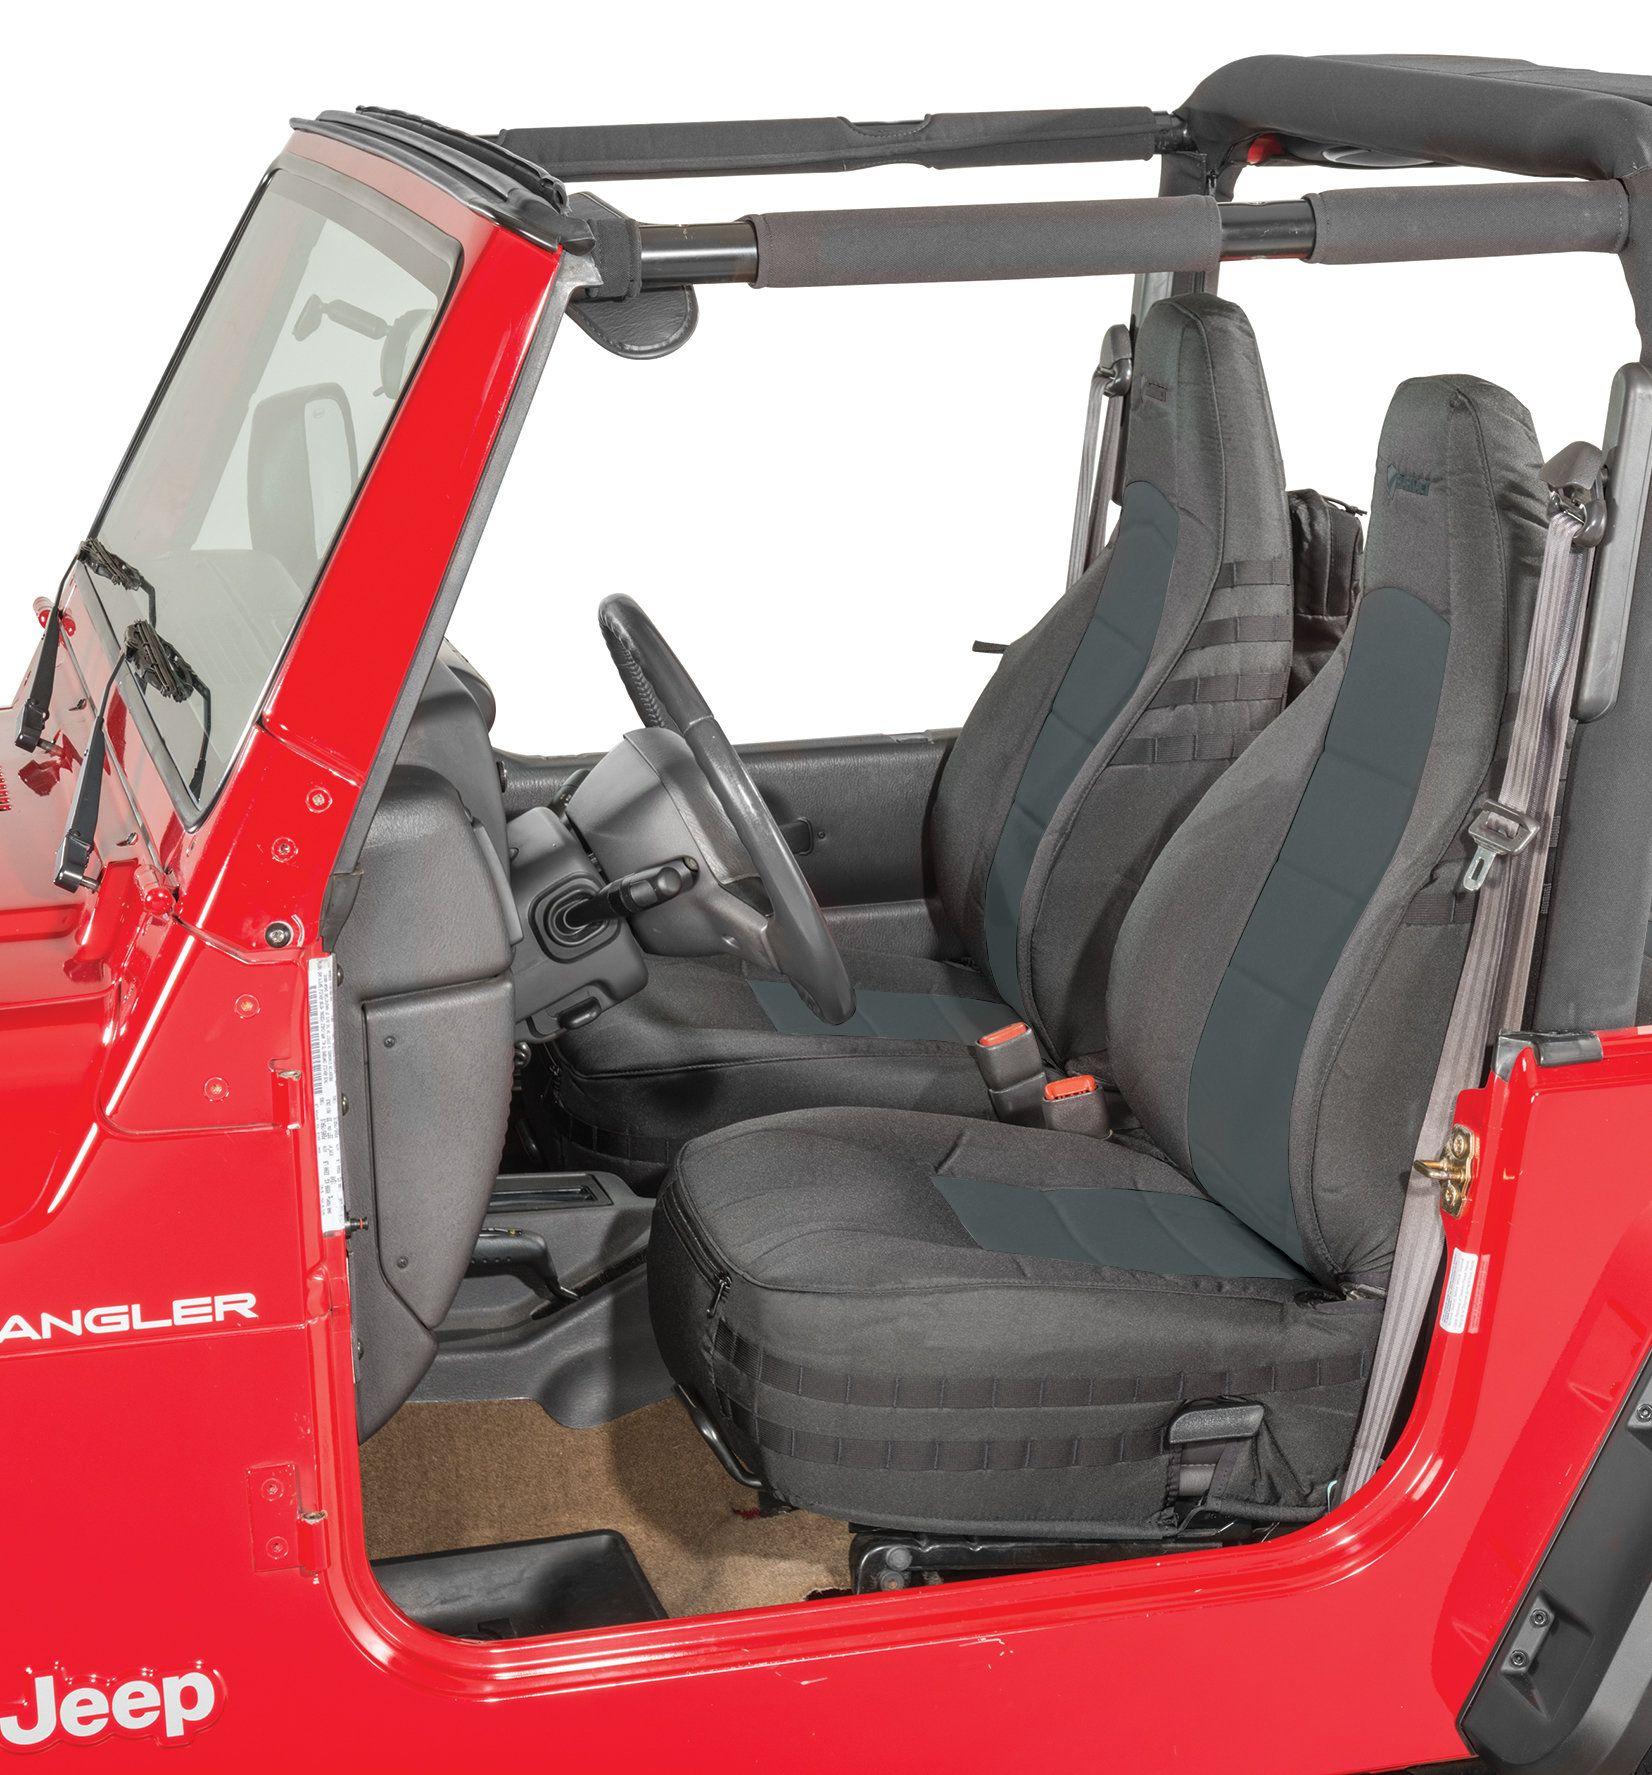 Cool Jeep Logo - Jeep: Cool Seat Covers For Jeep Wrangler Inspiration Jeep Logo Seat ...